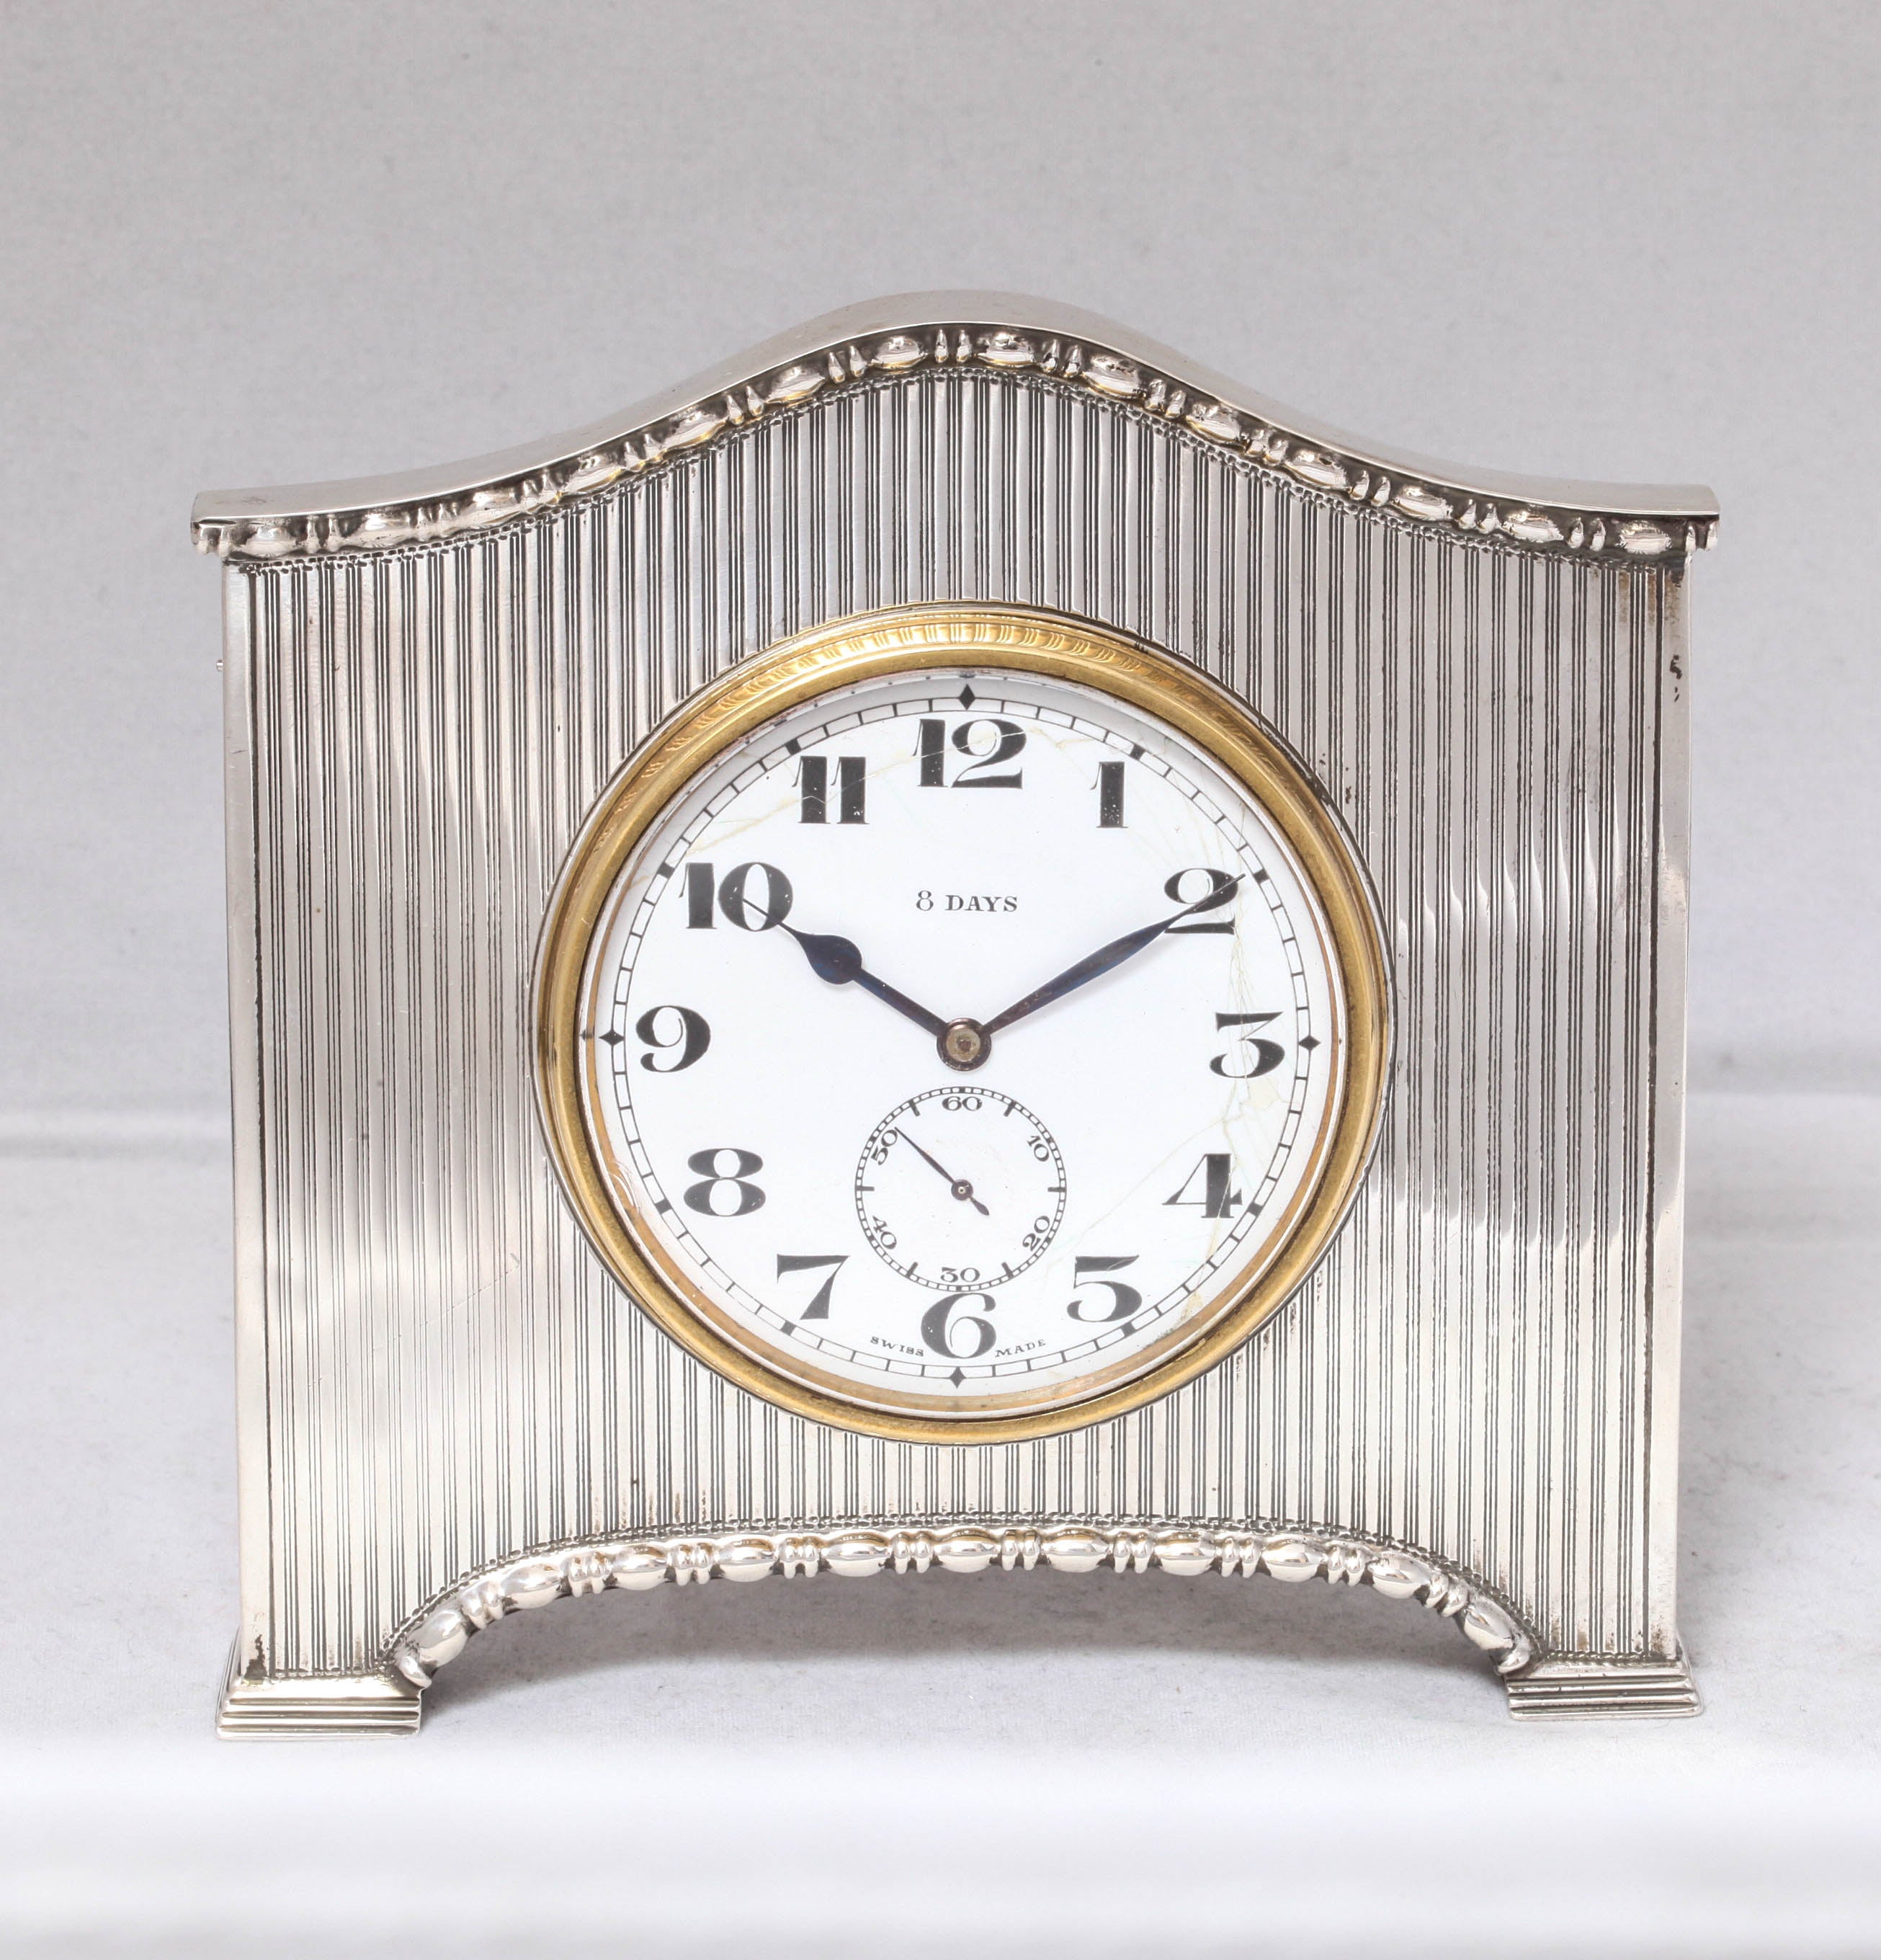 Art Deco, sterling silver, footed  table clock, Sheffield, England, 1925, Walker & Hall - makers. Lovely 